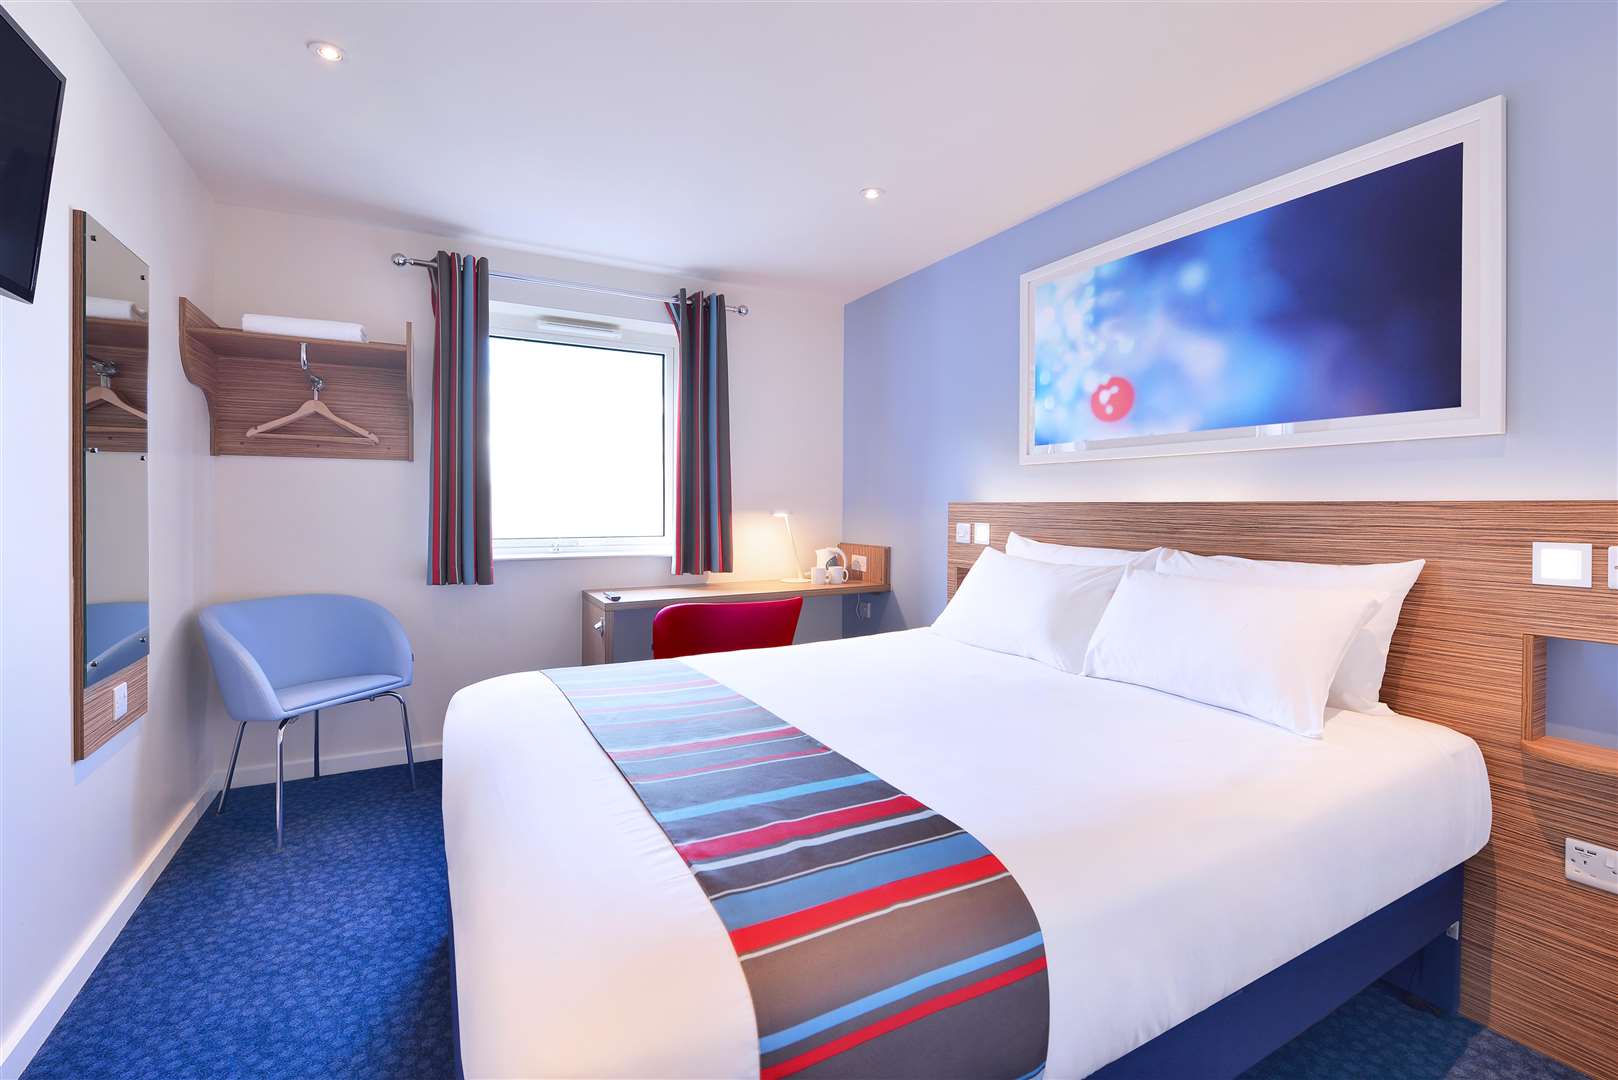 Travelodge is looking to add to its portfolio across the county